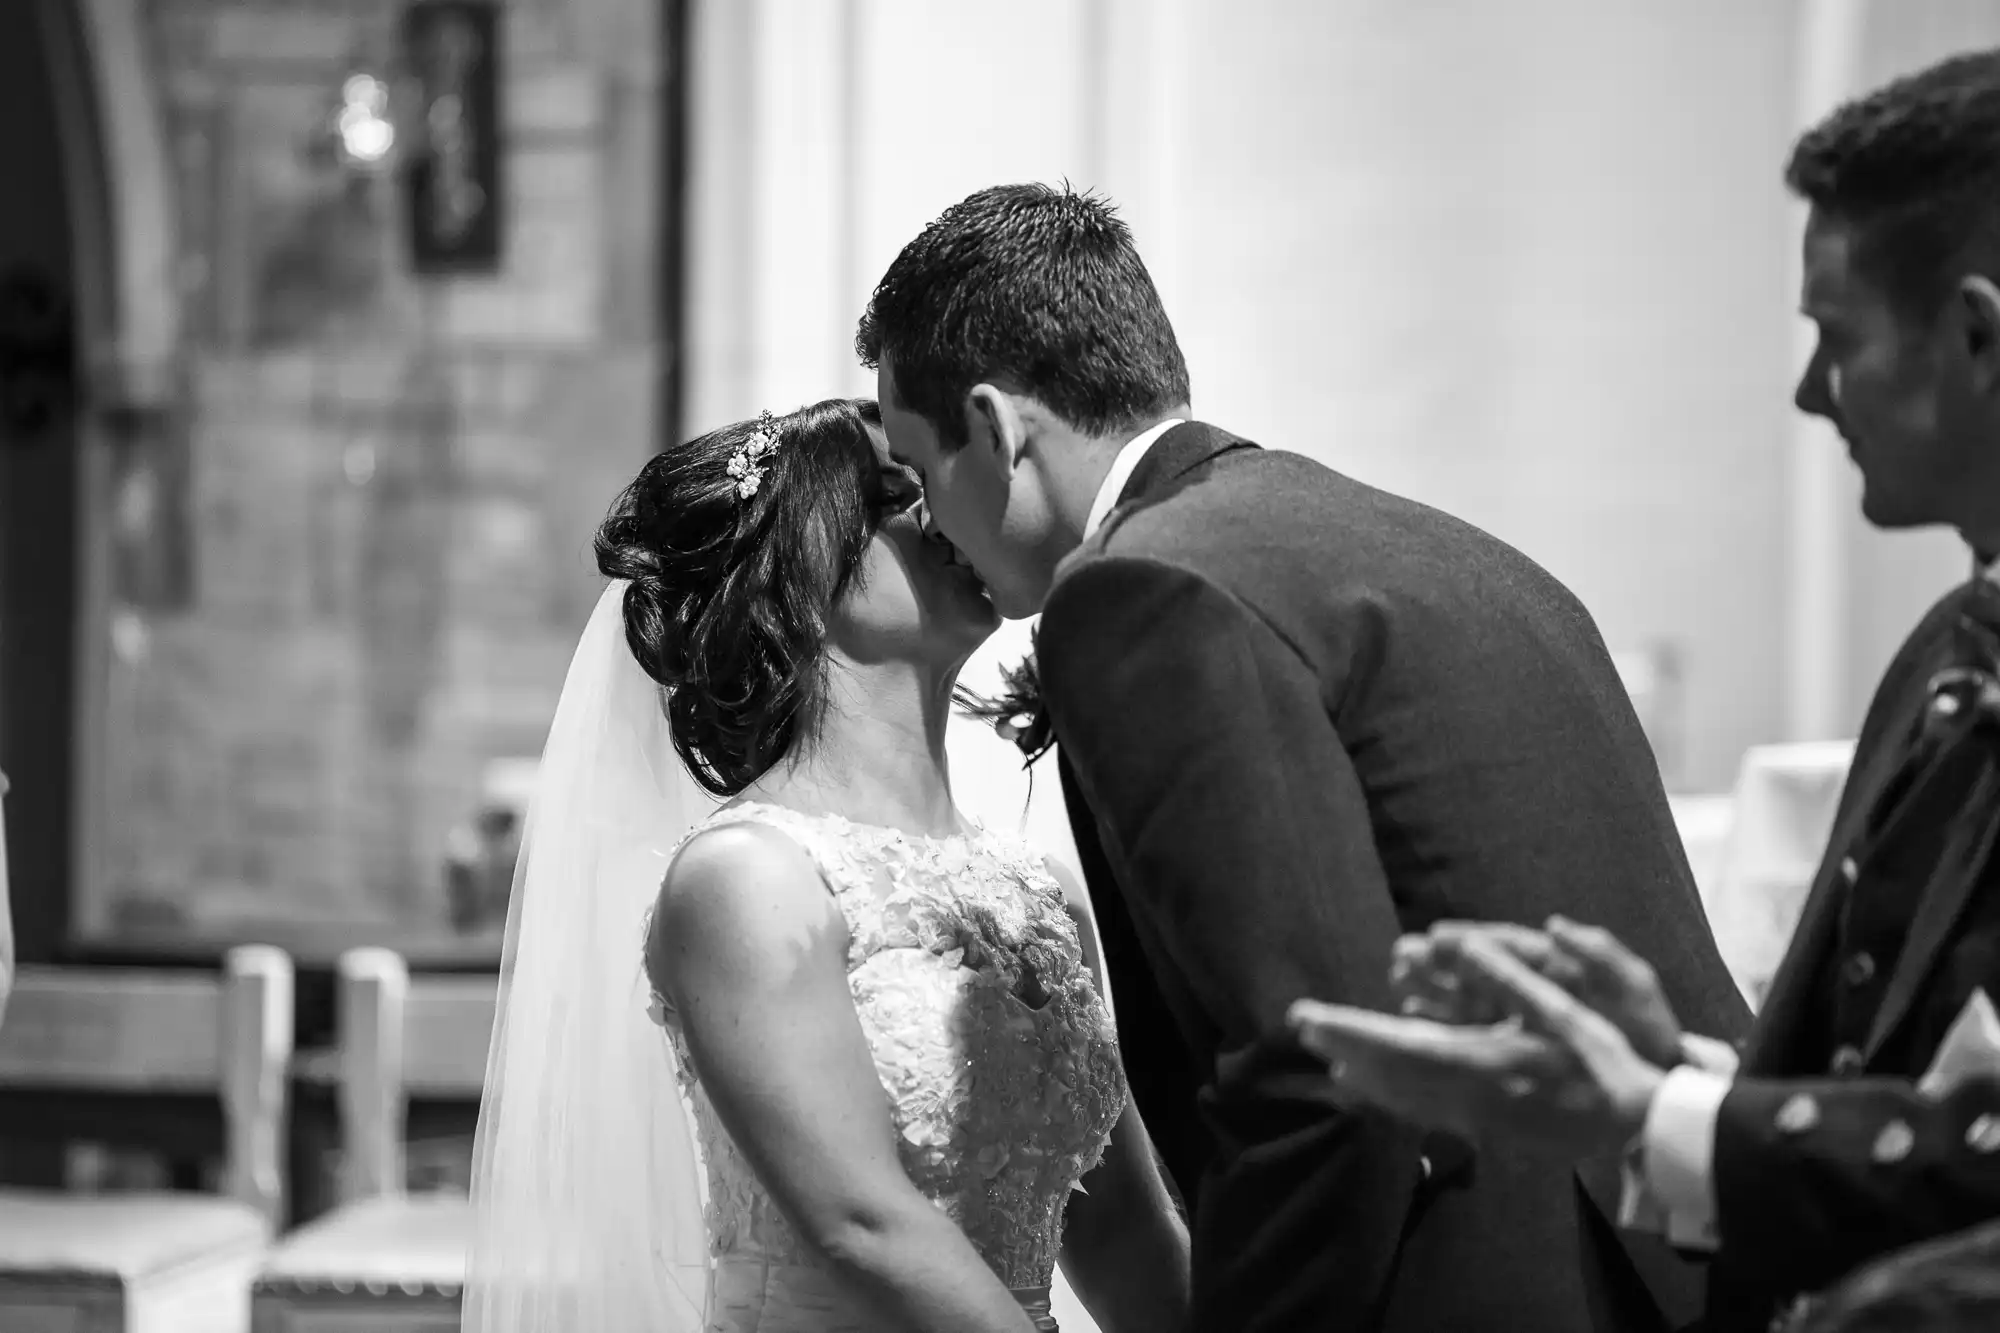 A bride and groom sharing a kiss at the altar during their wedding ceremony, in black and white, with an applauding guest visible.